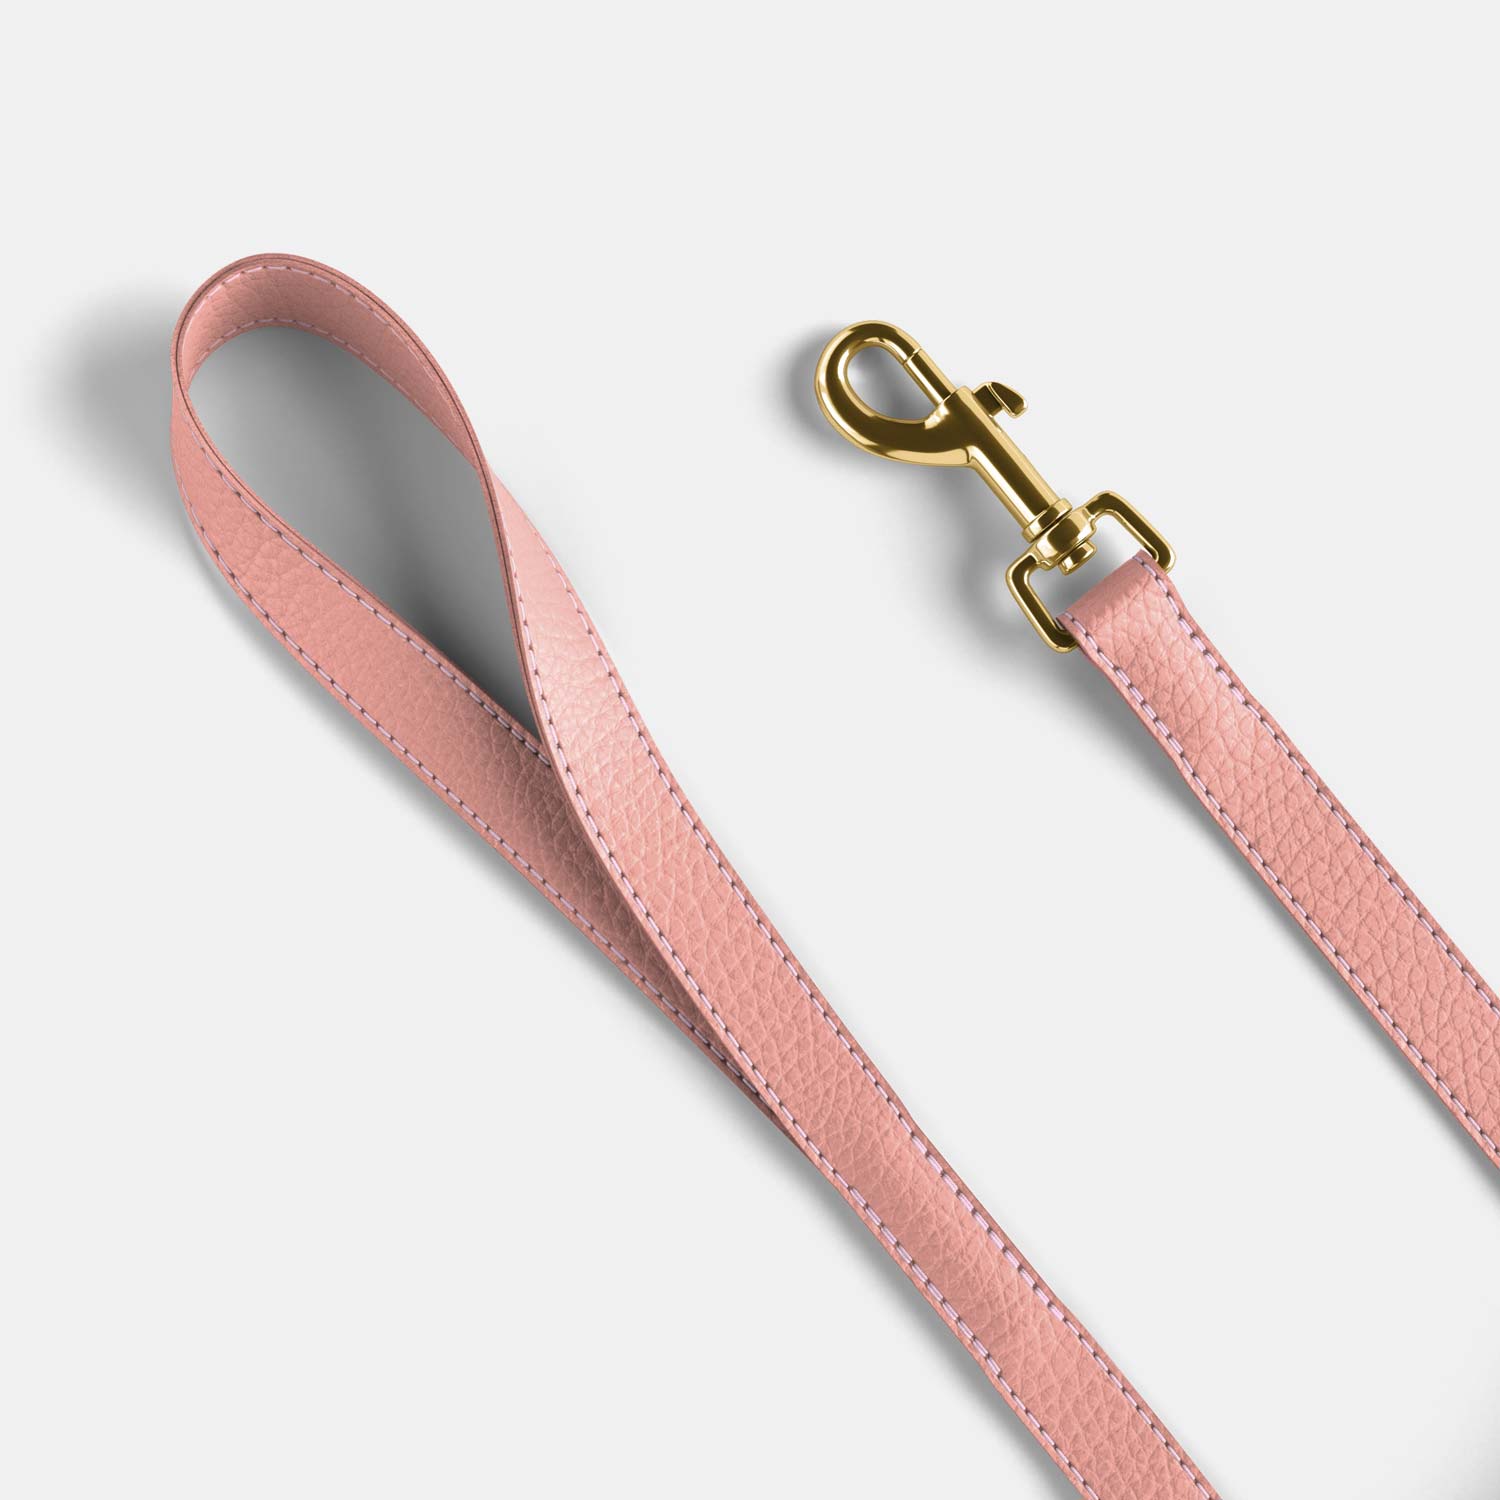 Leather Dog Lead - Red and Coral